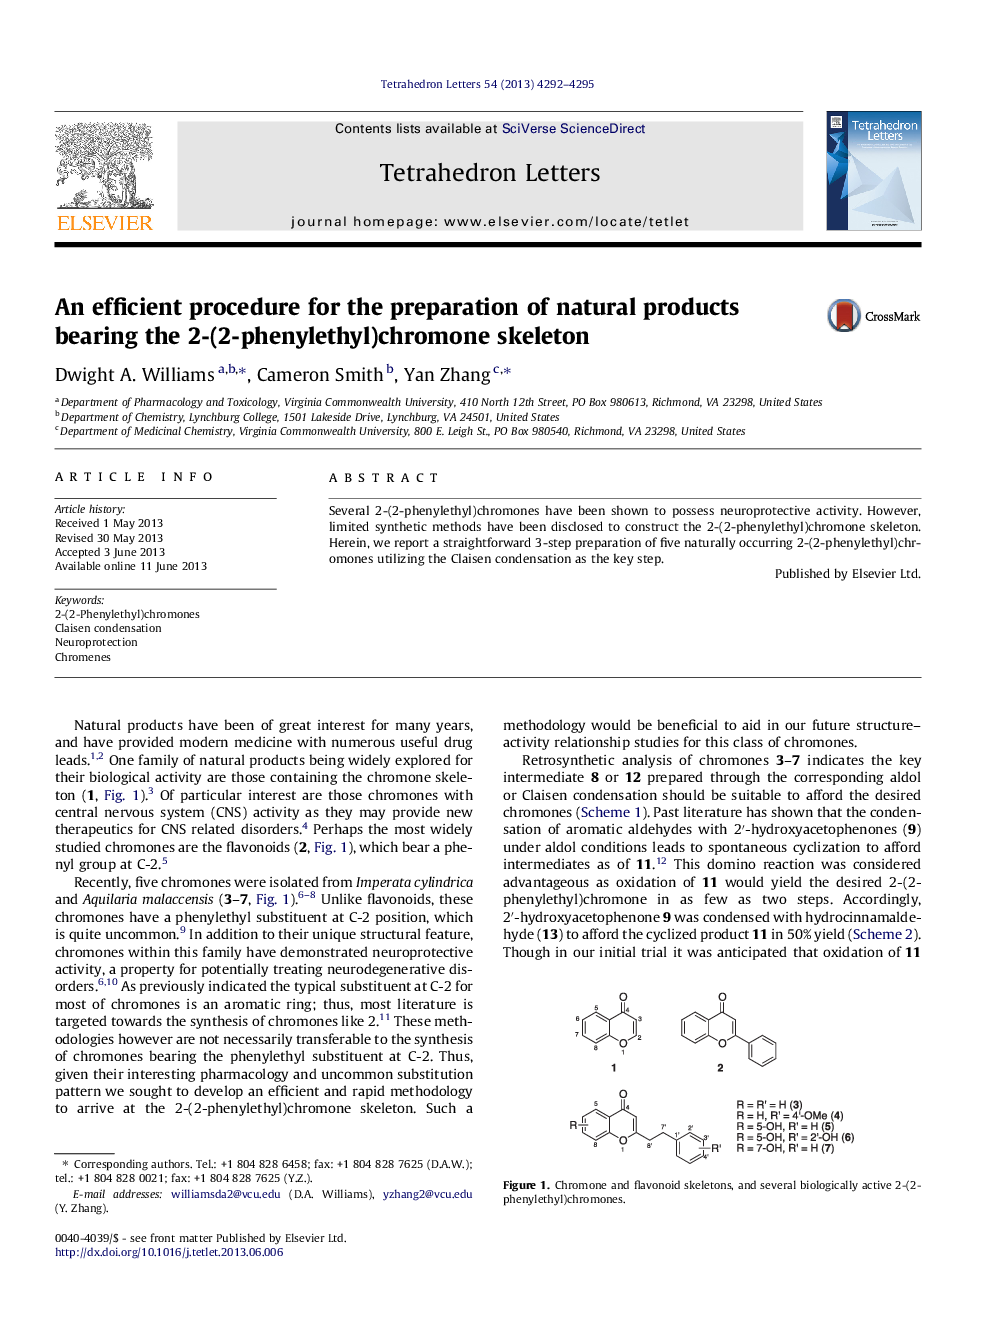 An efficient procedure for the preparation of natural products bearing the 2-(2-phenylethyl)chromone skeleton